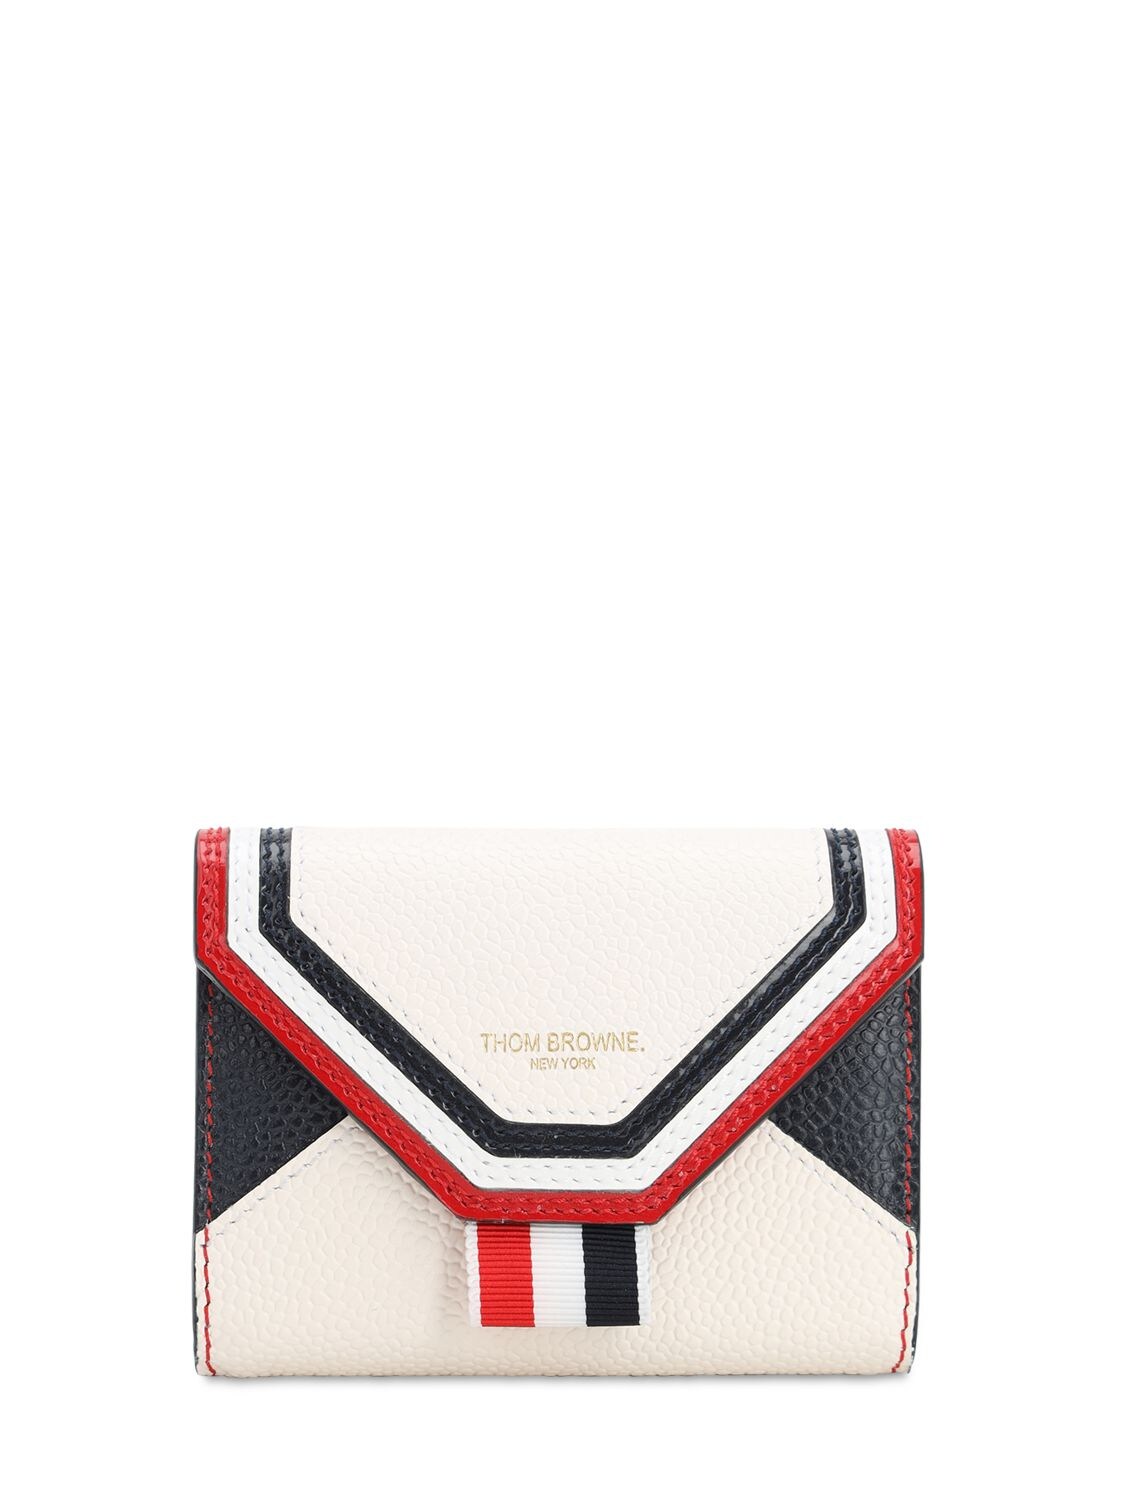 THOM BROWNE ENVELOP GRAINED LEATHER COMPACT WALLET,71IWV8007-MTAW0